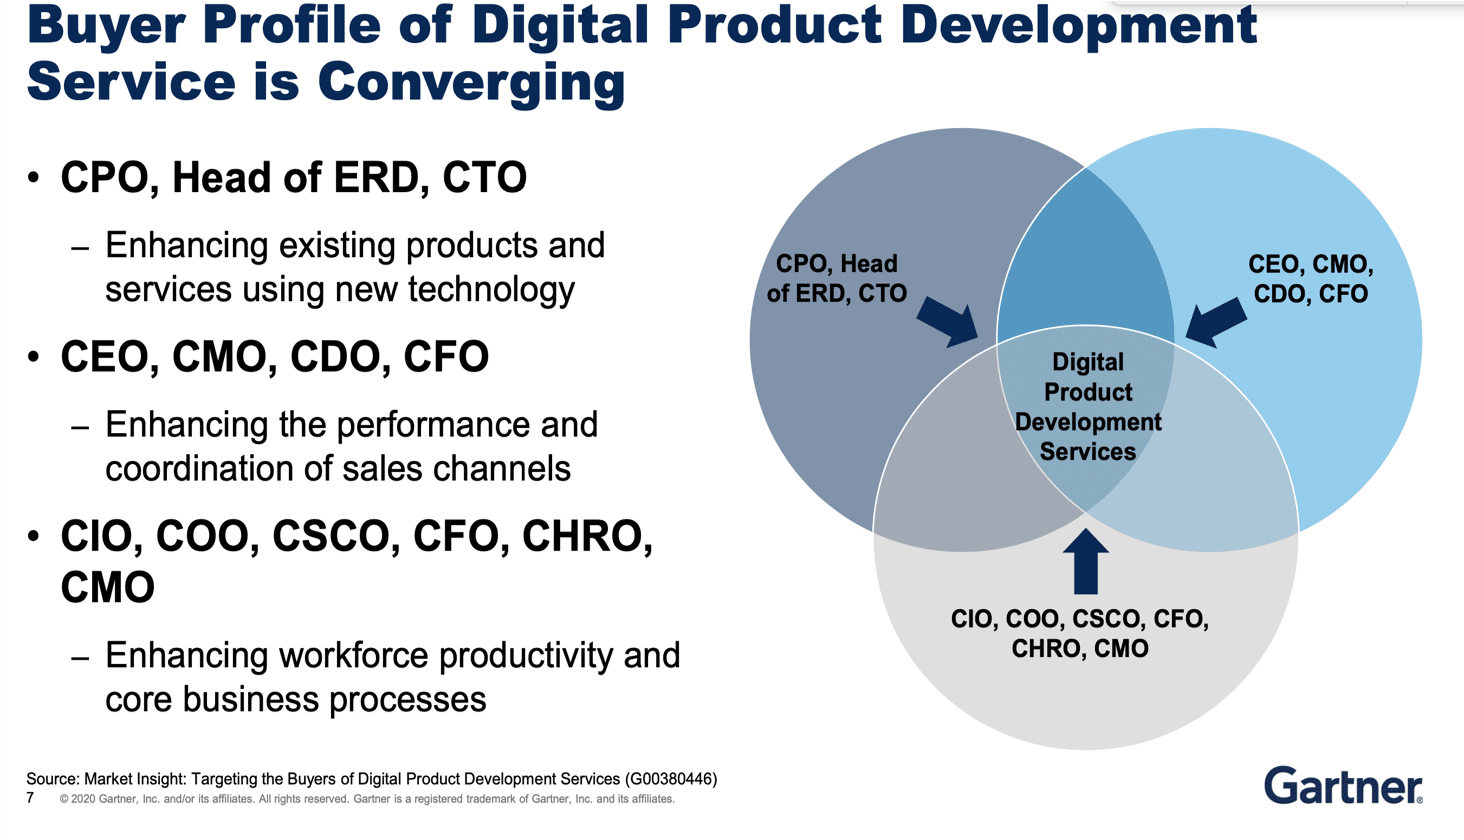 Buyer profile of Digital Product Development Service is converging